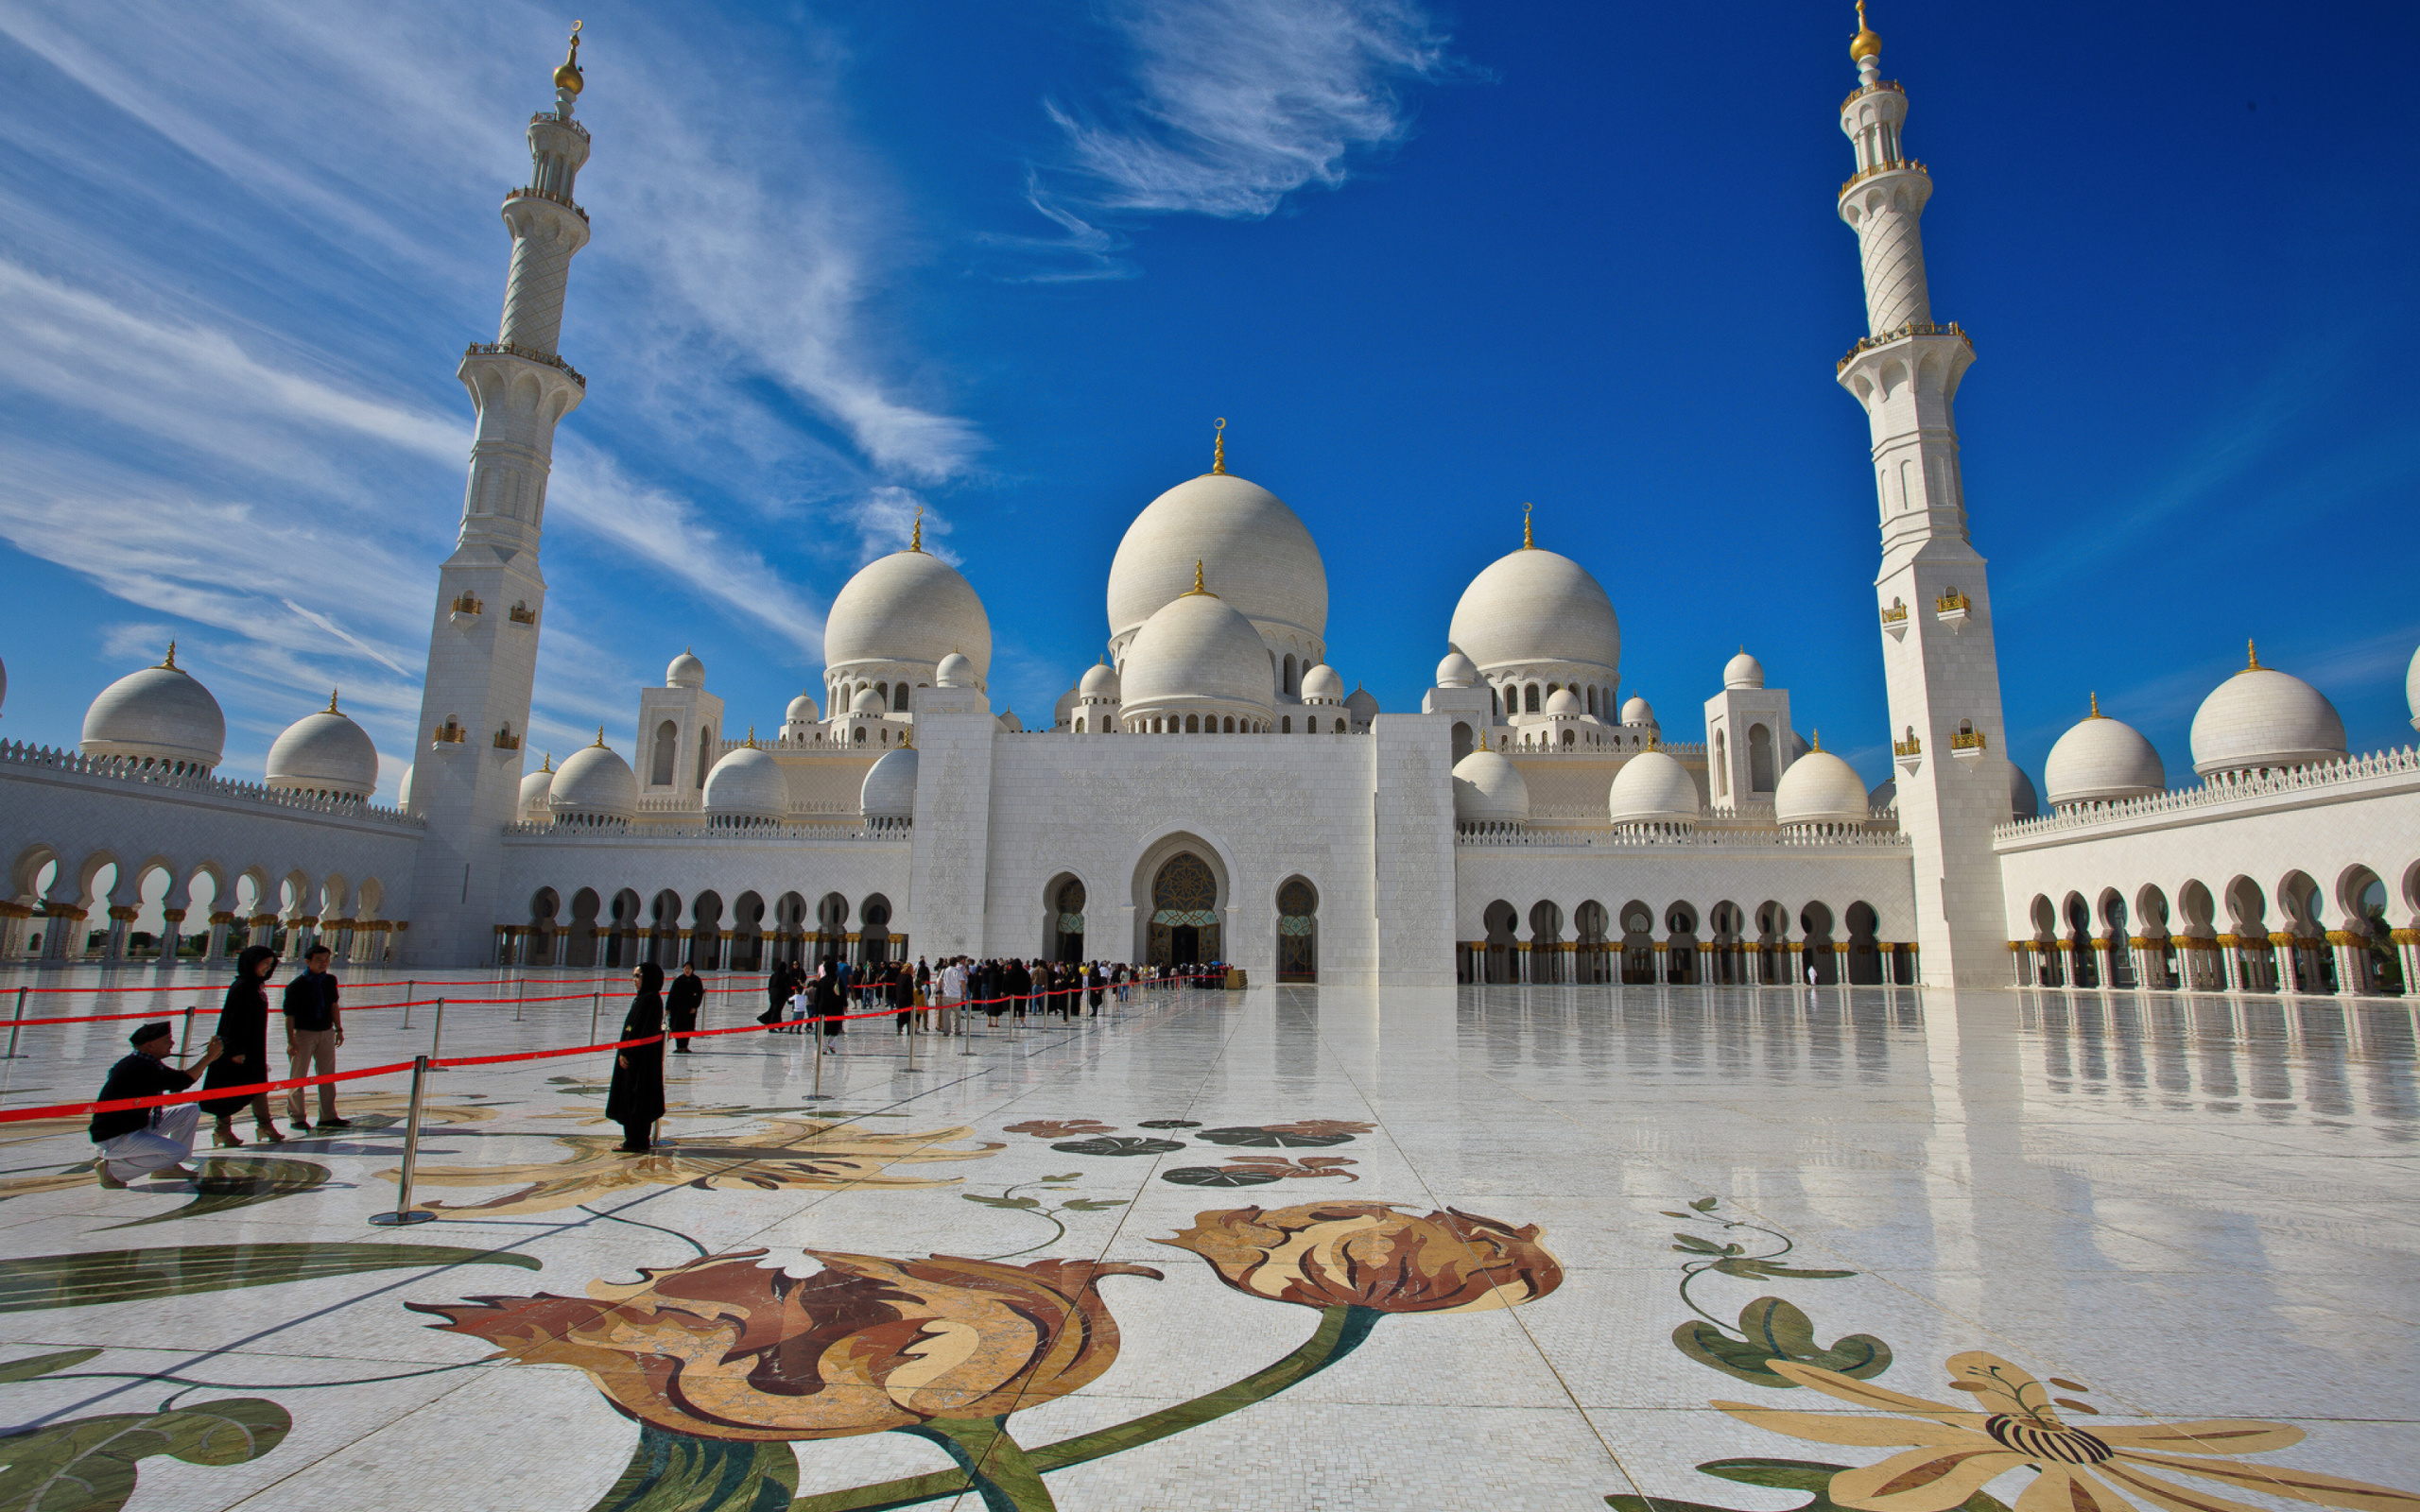 Sheikh Zayed Mosque located in Abu Dhabi wallpaper 2560x1600